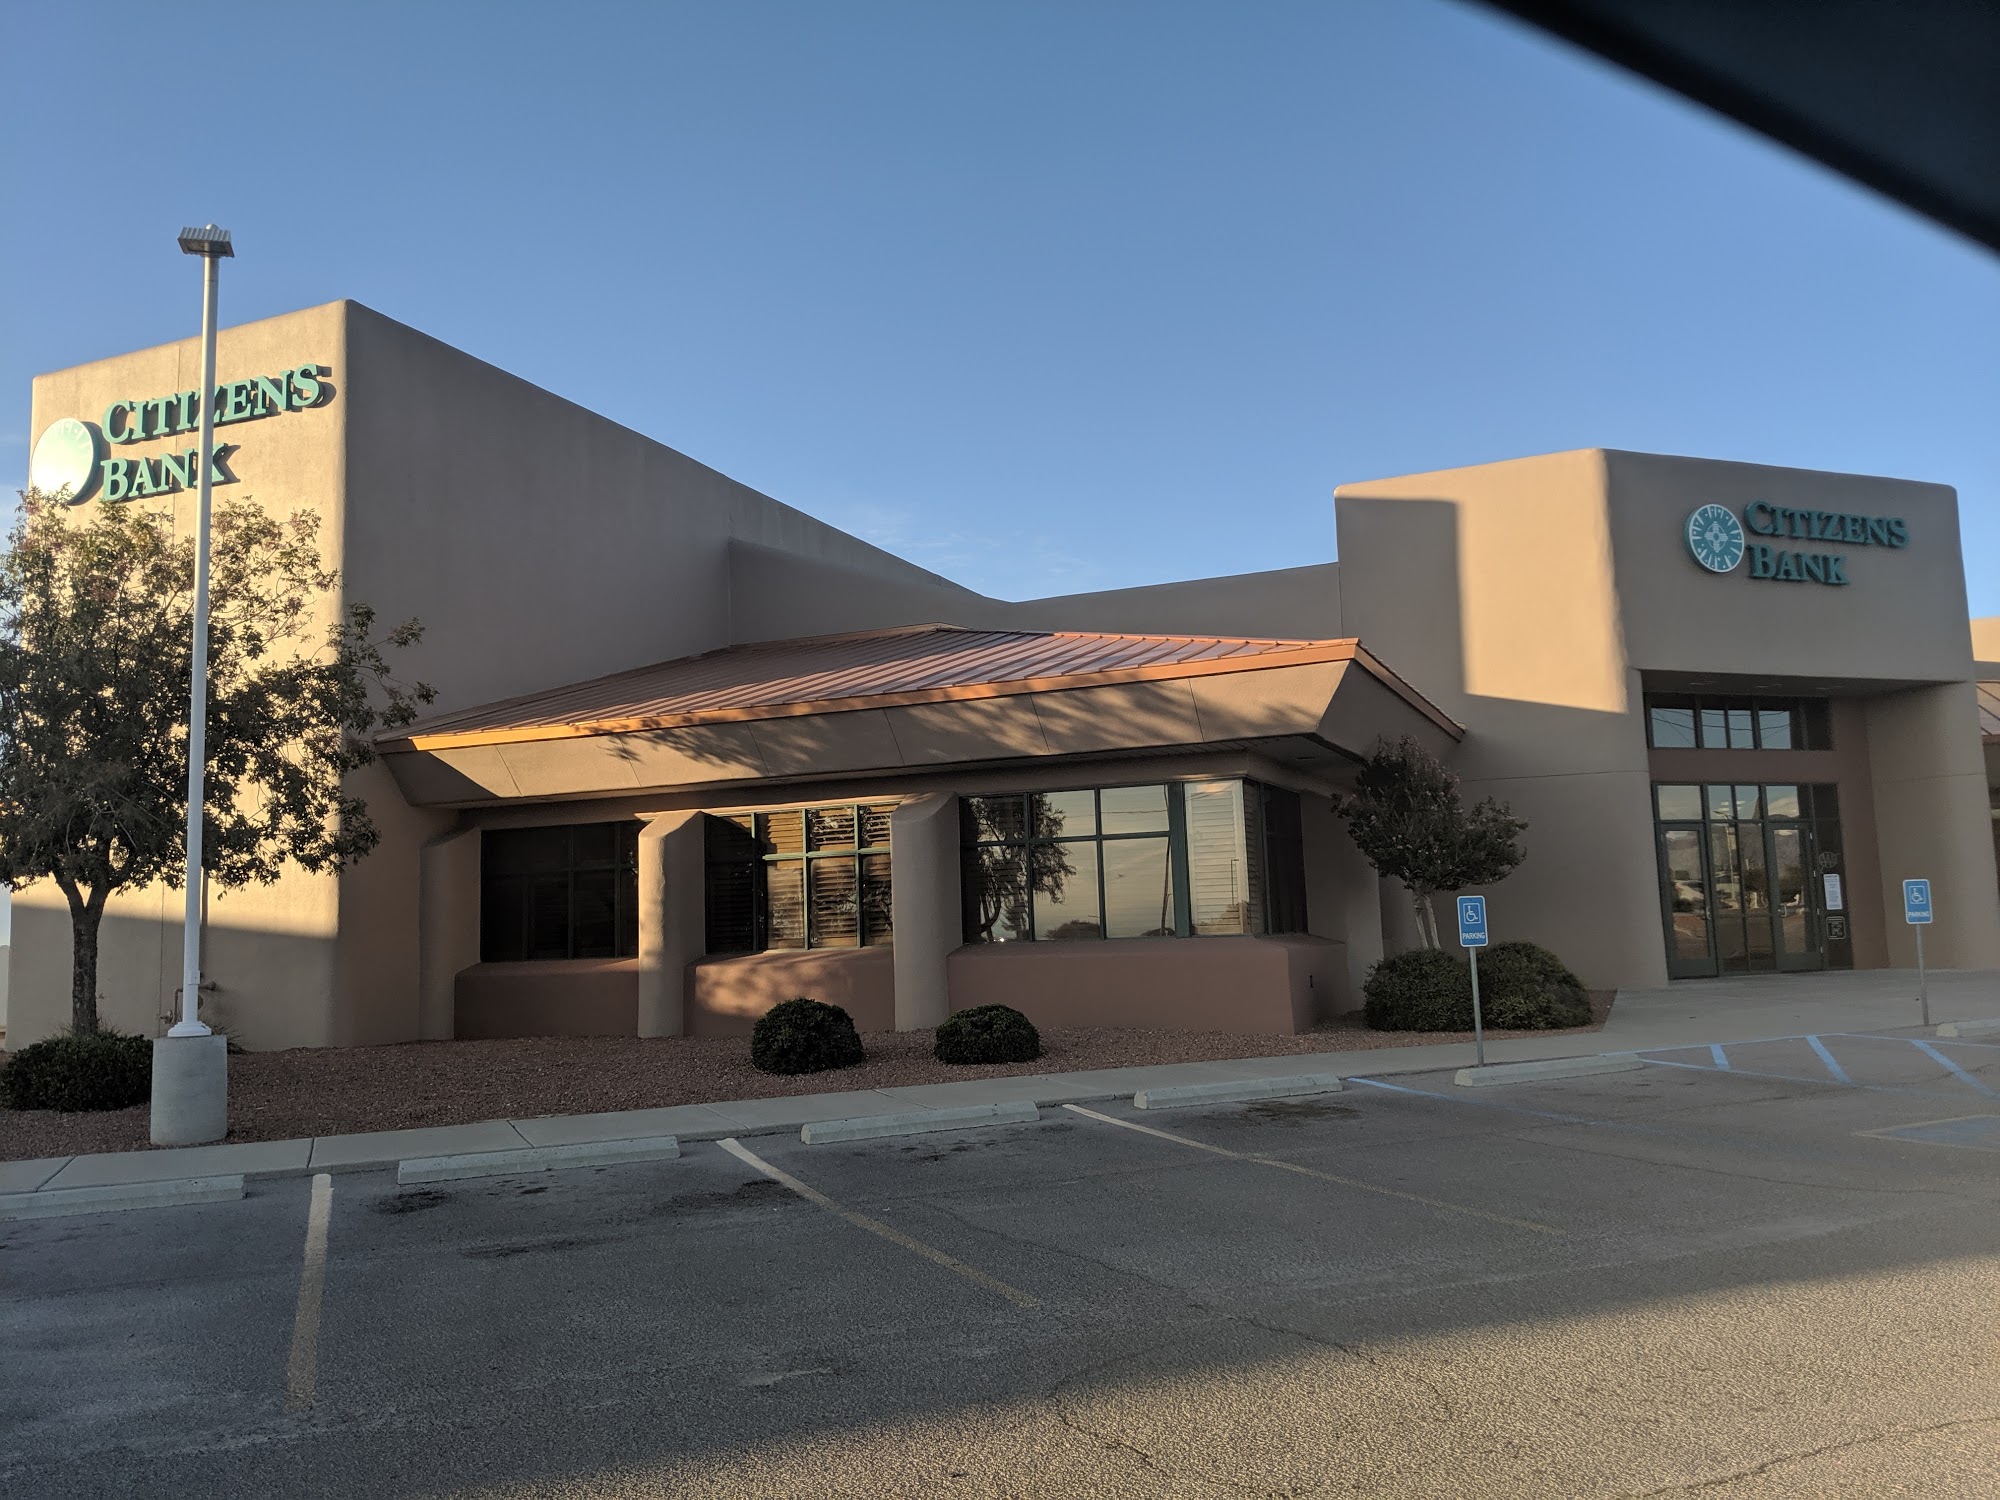 Citizens Bank of Las Cruces